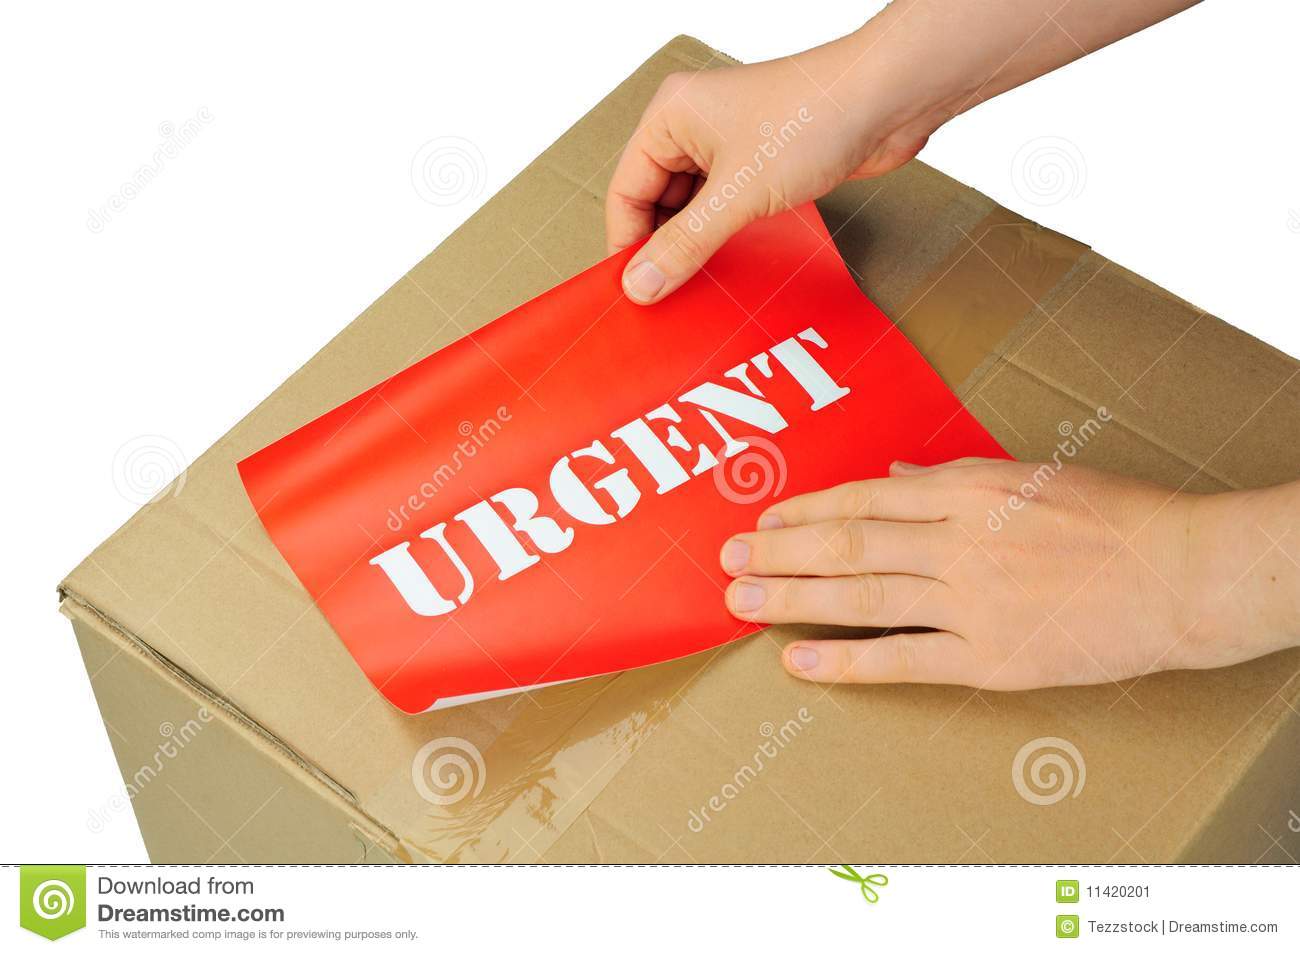 Urgent Delivery Stock Image   Image  11420201